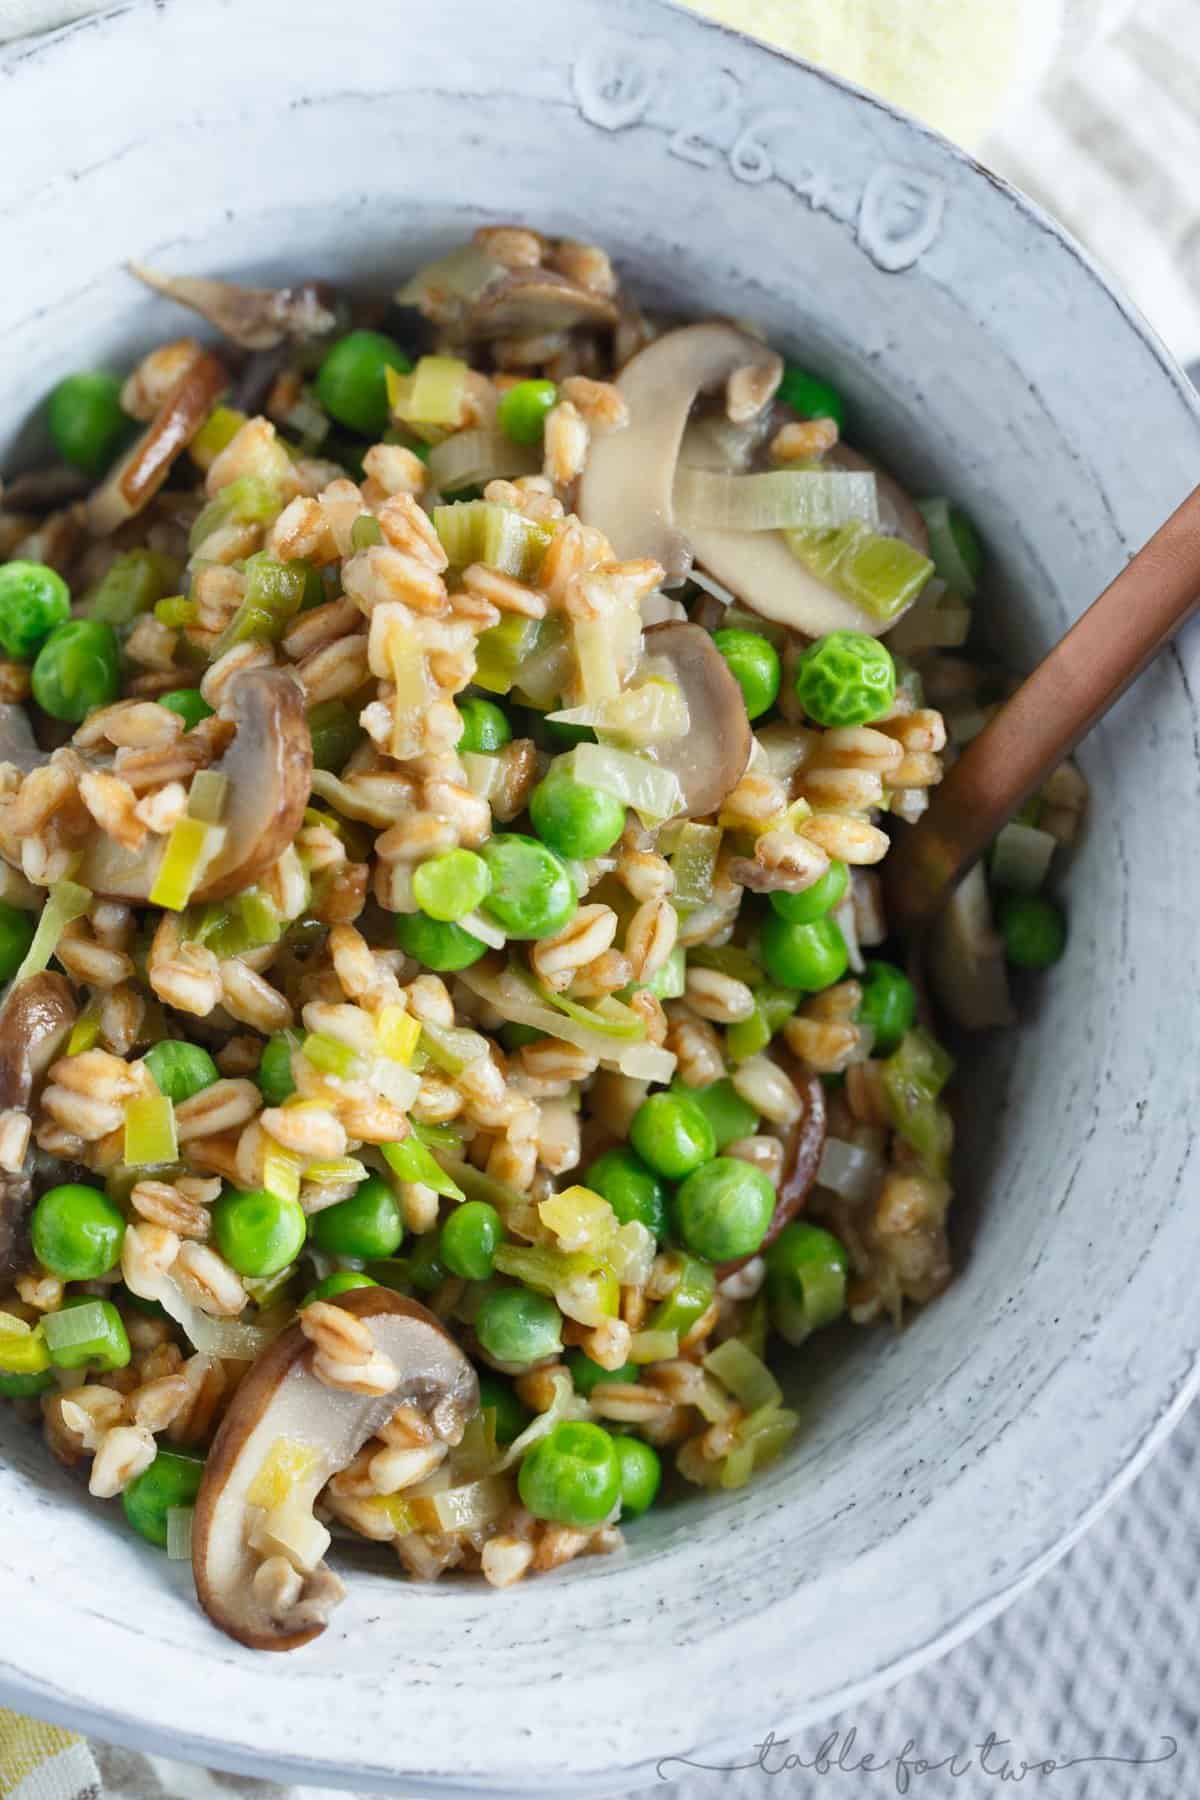 A great way to use farro in this flavorful dish! Filled with leeks, mushrooms, peas, and lots of parmesan cheese; this cozy farro dish is a quick one to whip up anytime of the week!